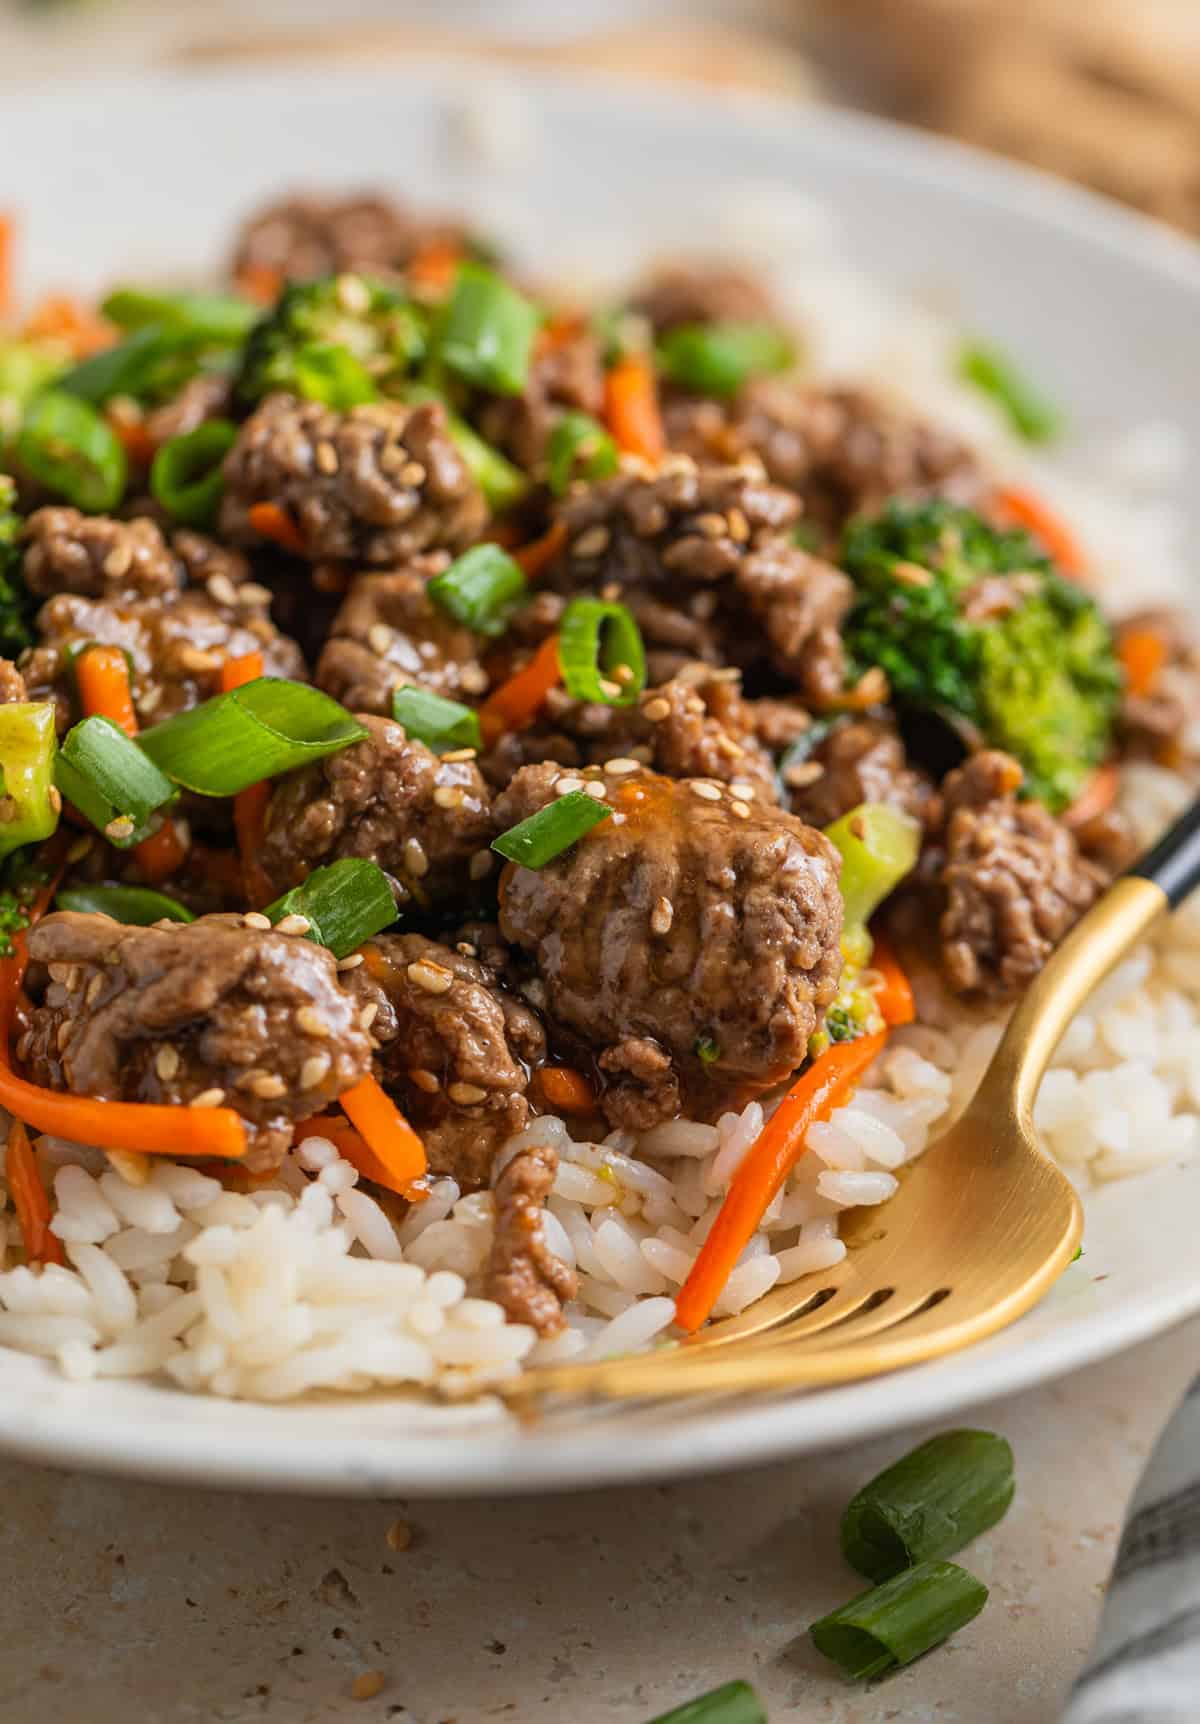 Clay plate with prepared beef stir fry over rice and topped with sesame seeds.